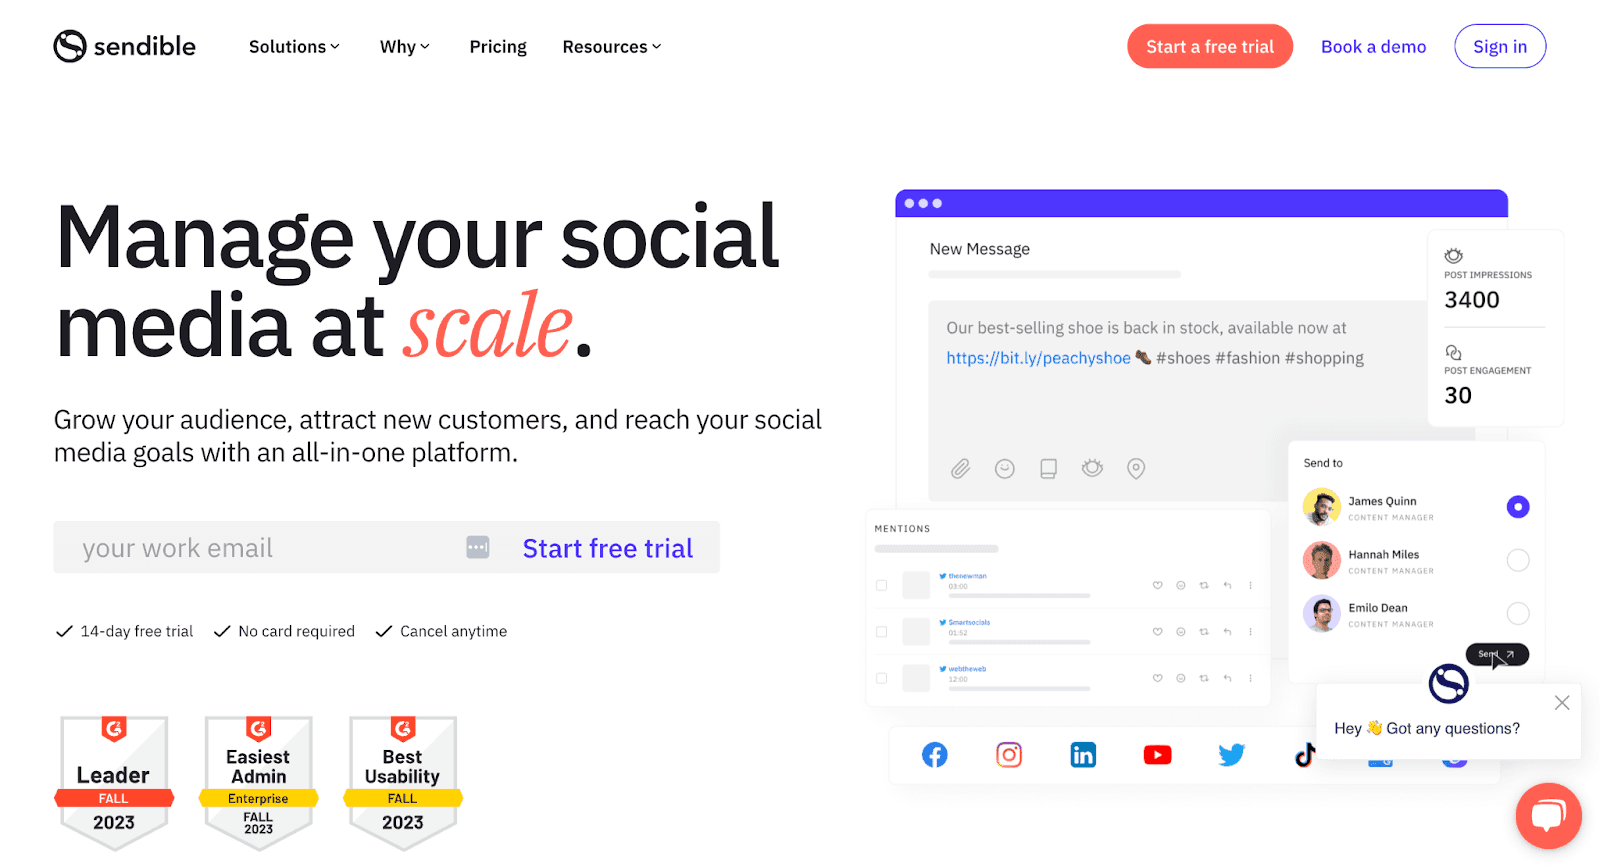 Manage your social media at scale